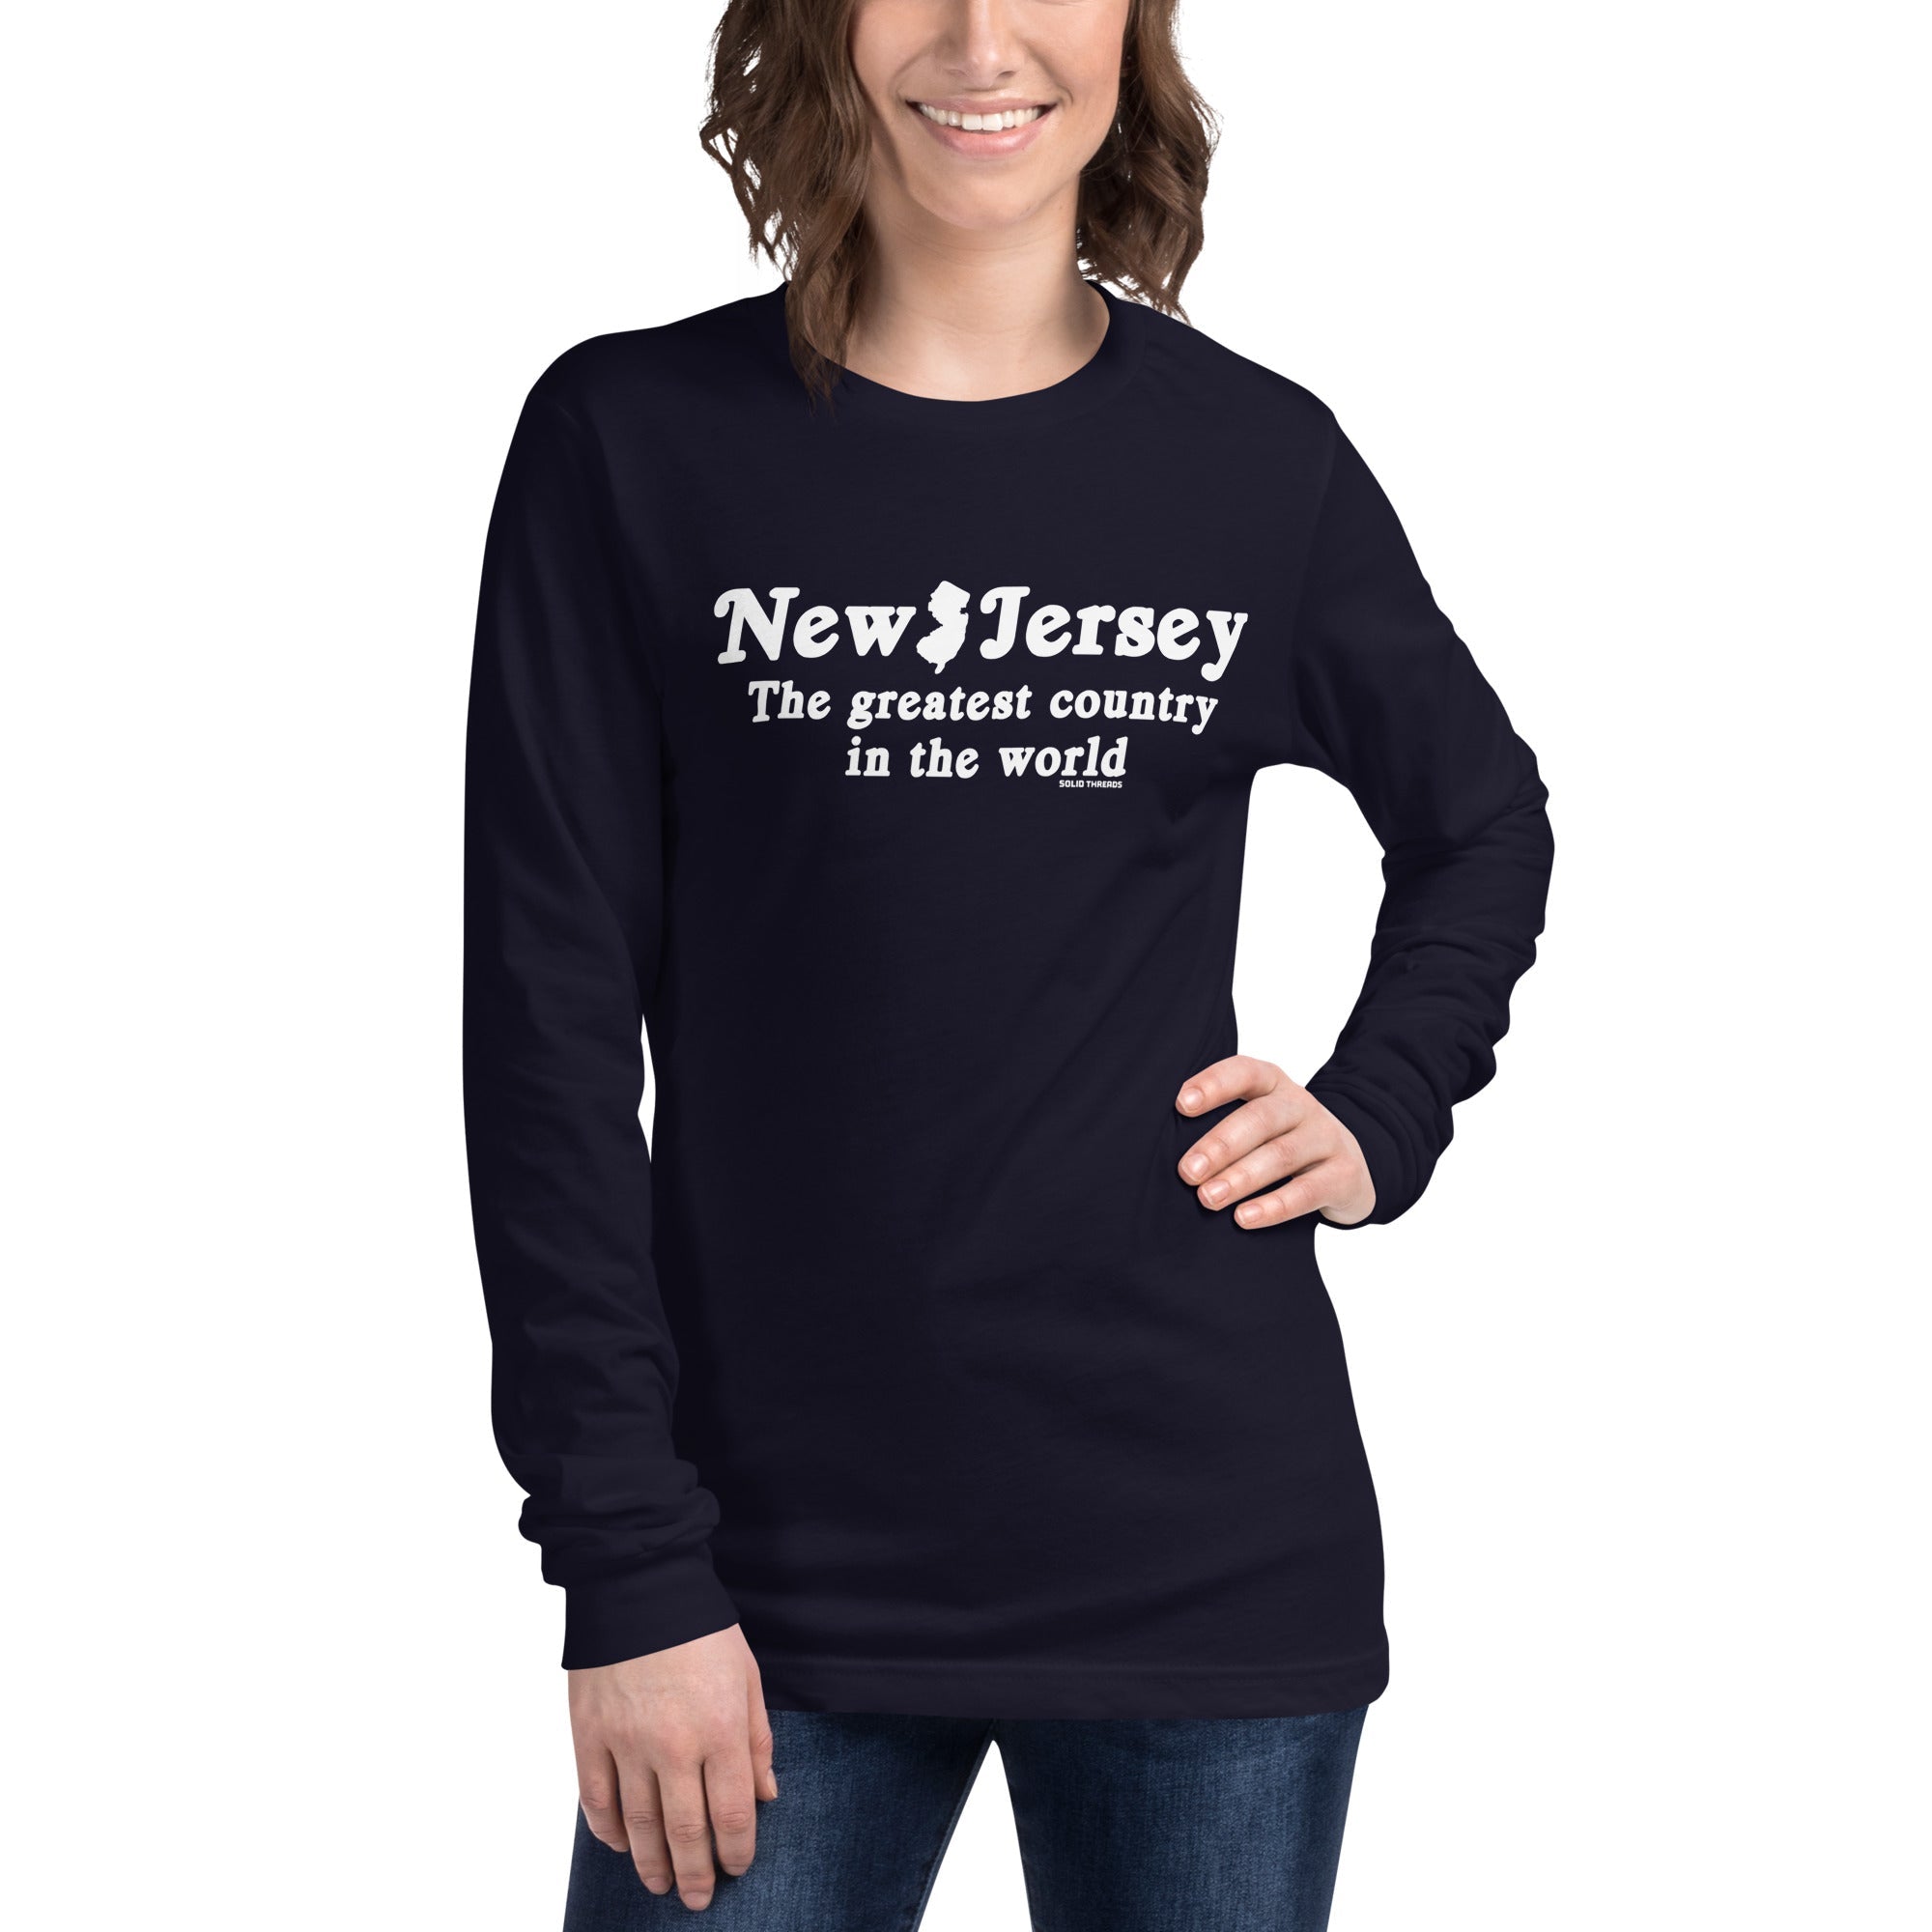 New Jersey The Greatest Country In The World Vintage Navy Long Sleeve T Shirt | Funny Garden State Graphic Tee on Model | Solid Threads